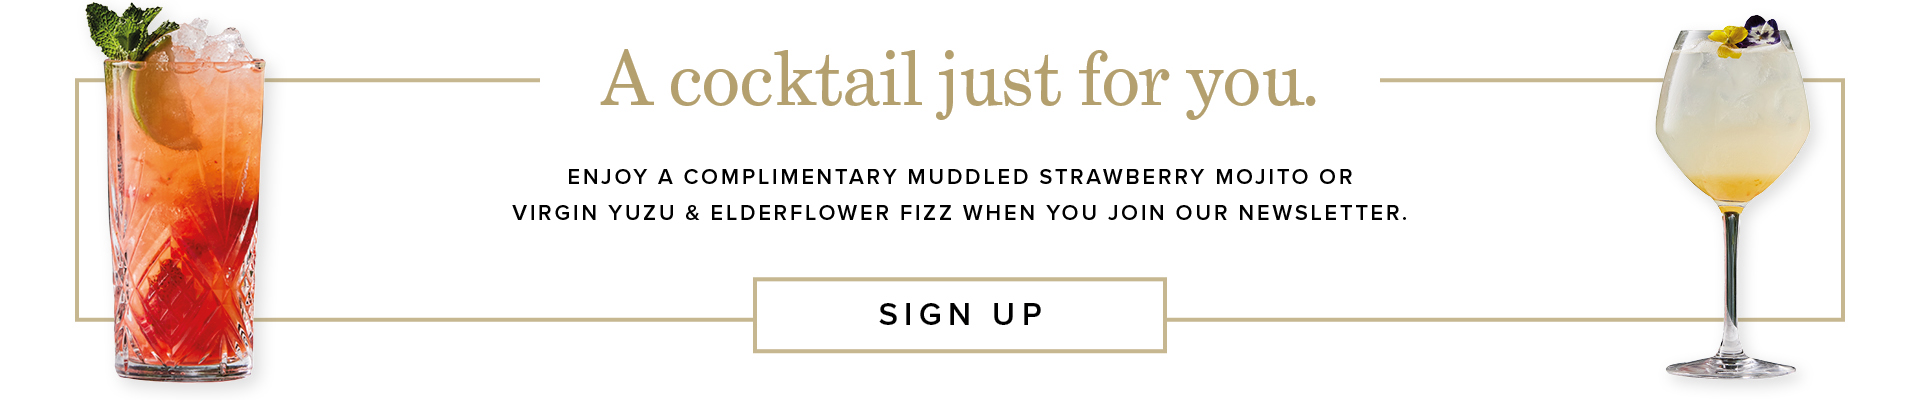 Sign up for a complimentary cocktail